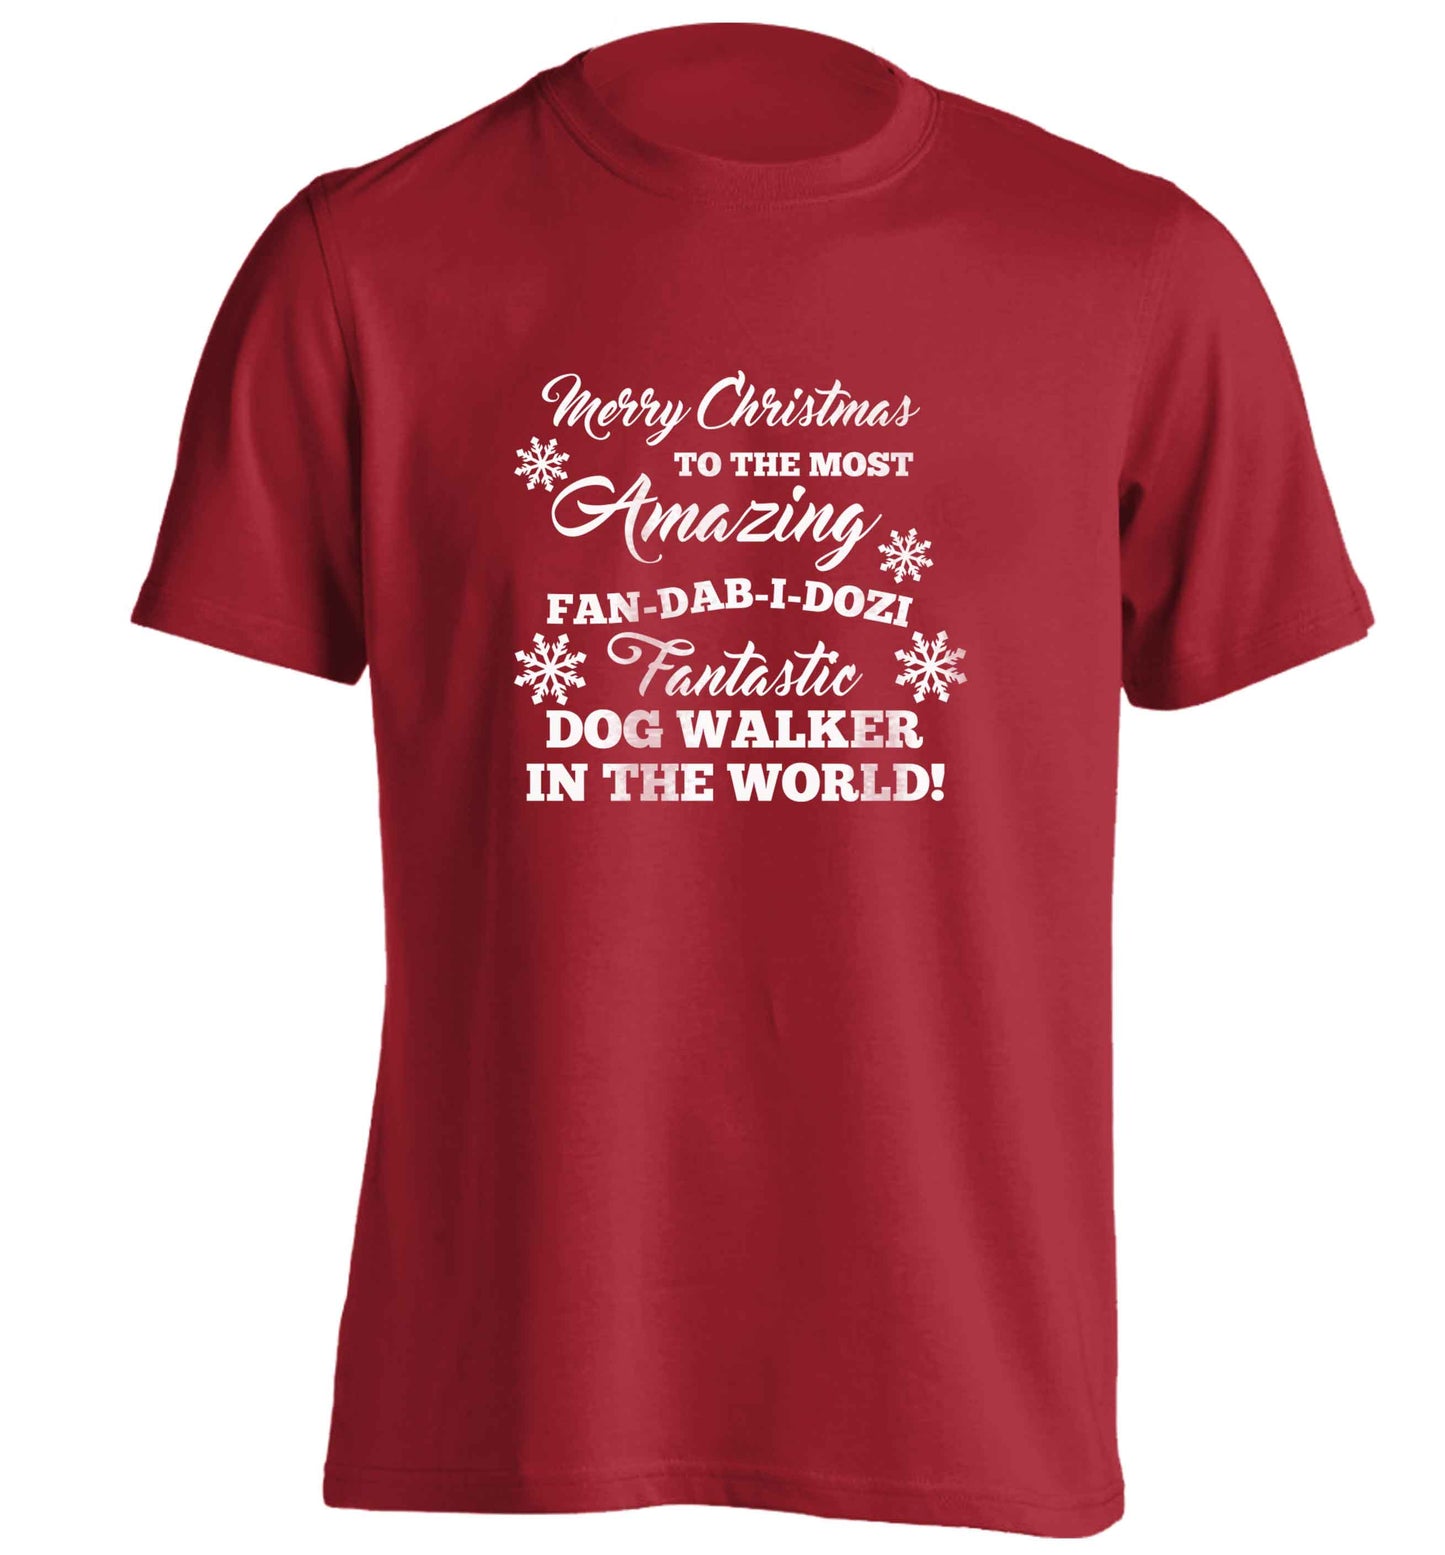 Merry Christmas to the most amazing fan-dab-i-dozi fantasic dog walker in the world adults unisex red Tshirt 2XL